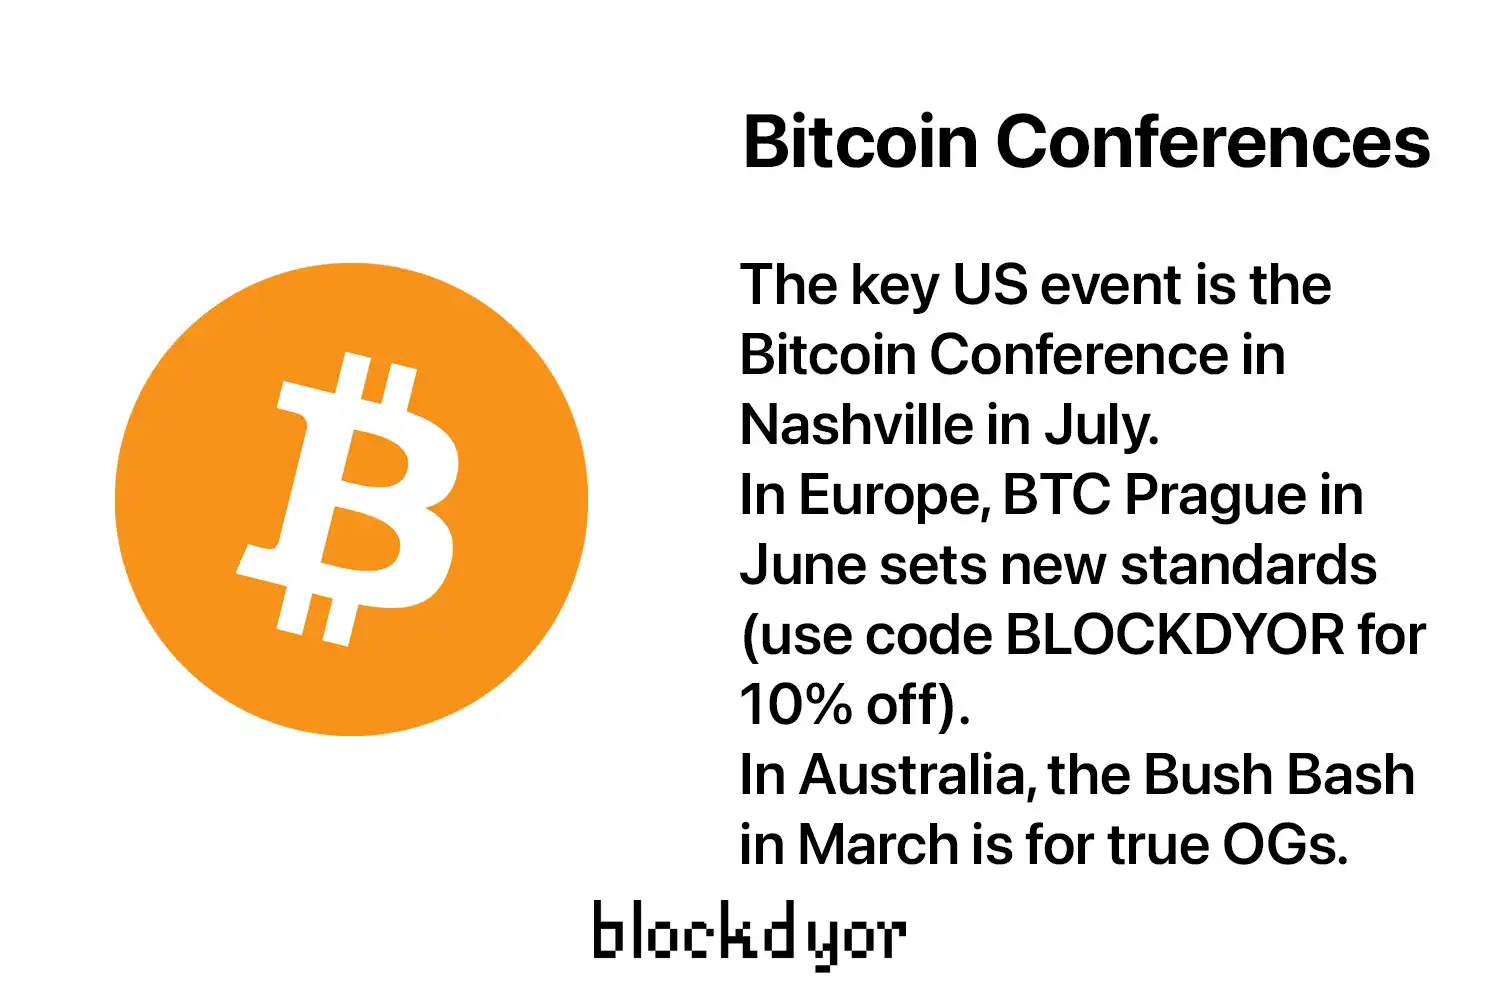 Bitcoin Conferences Overview